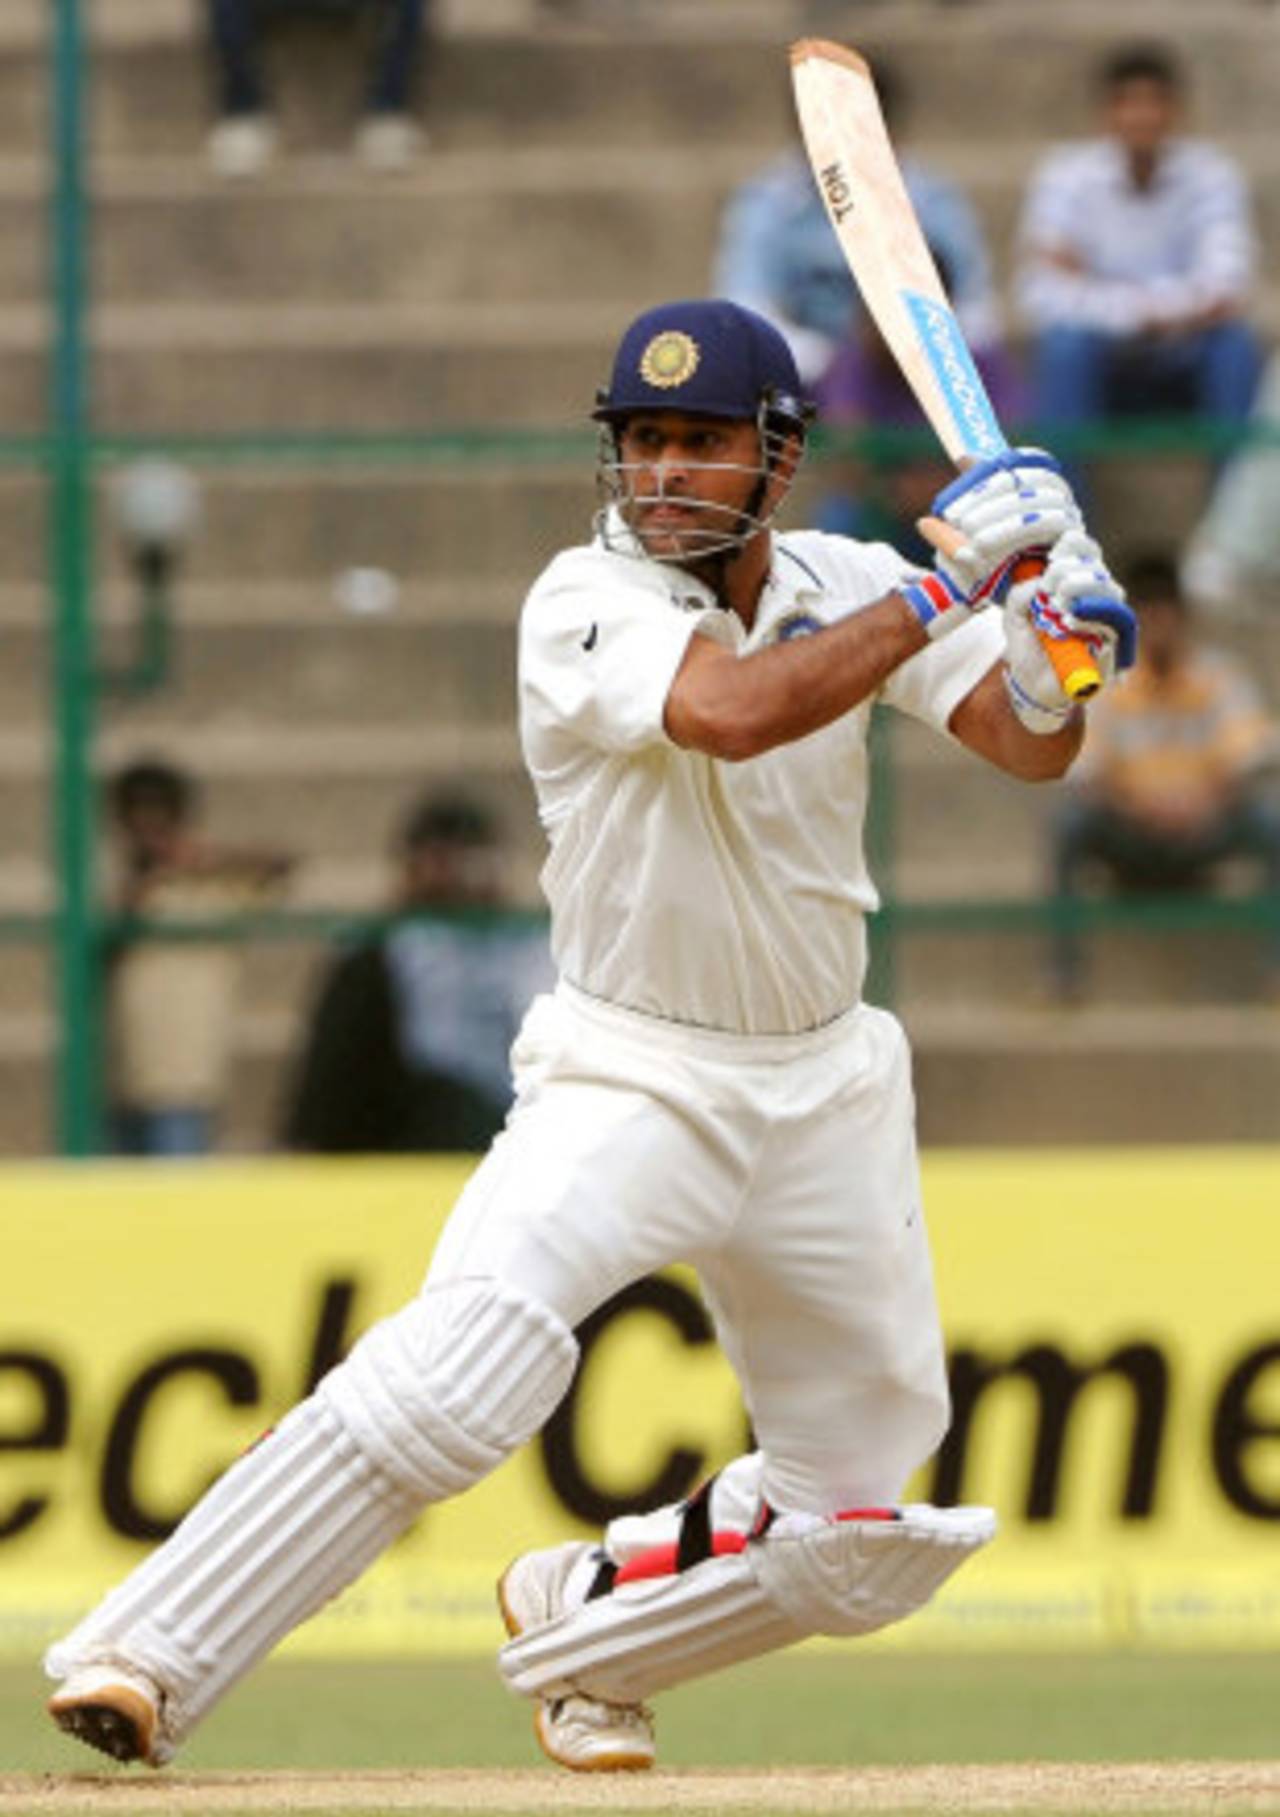 MS Dhoni sends one through the off side, India v New Zealand, 2nd Test, Bangalore, 4th day, September 3, 2012